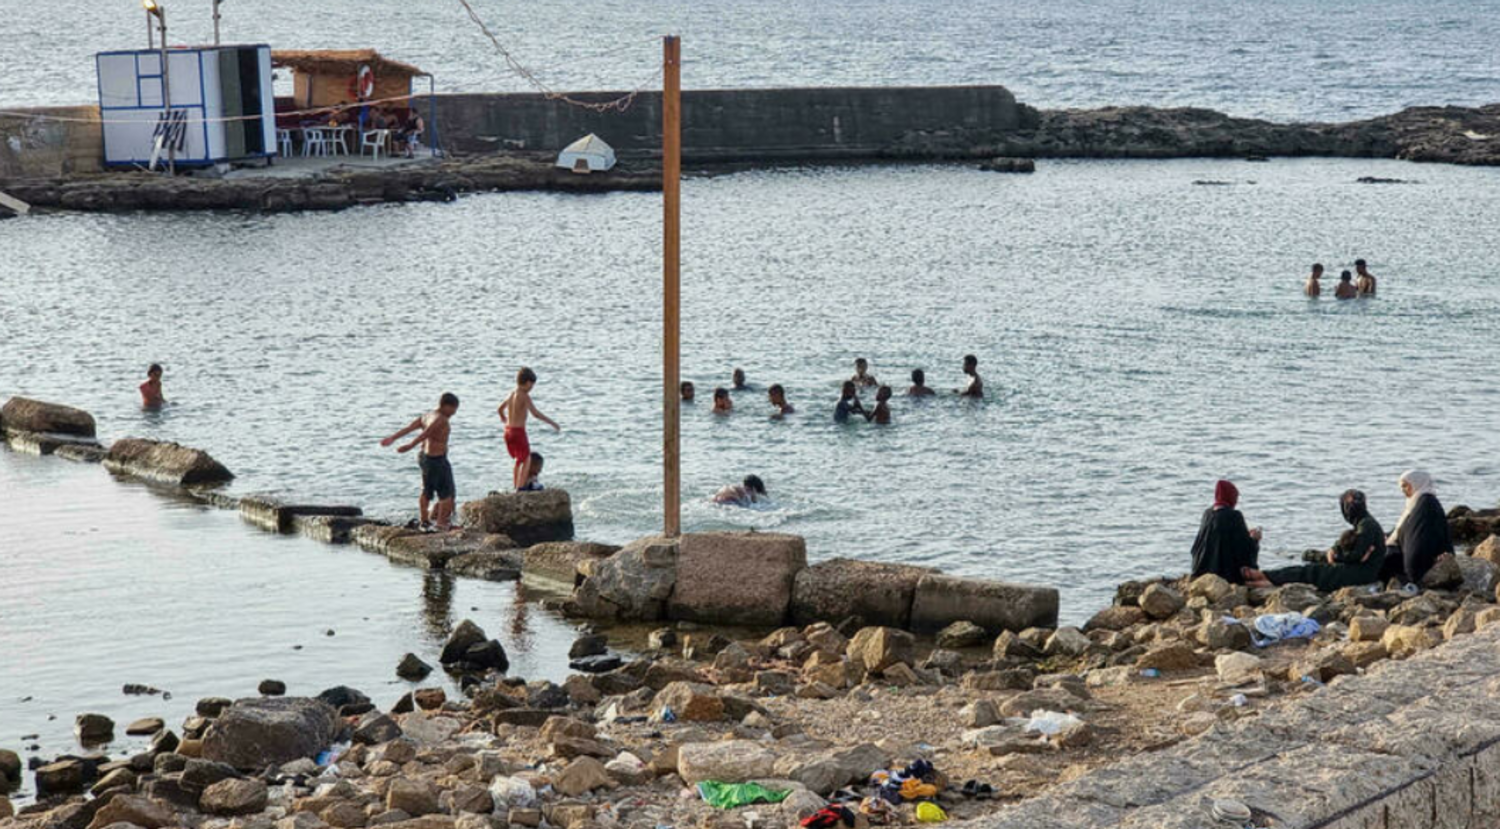 Libyans swim in the Mediterranean sea at the capital Tripoli's waterfront, on August 21, 2021. (Photo by Mahmud TURKIA / AFP)